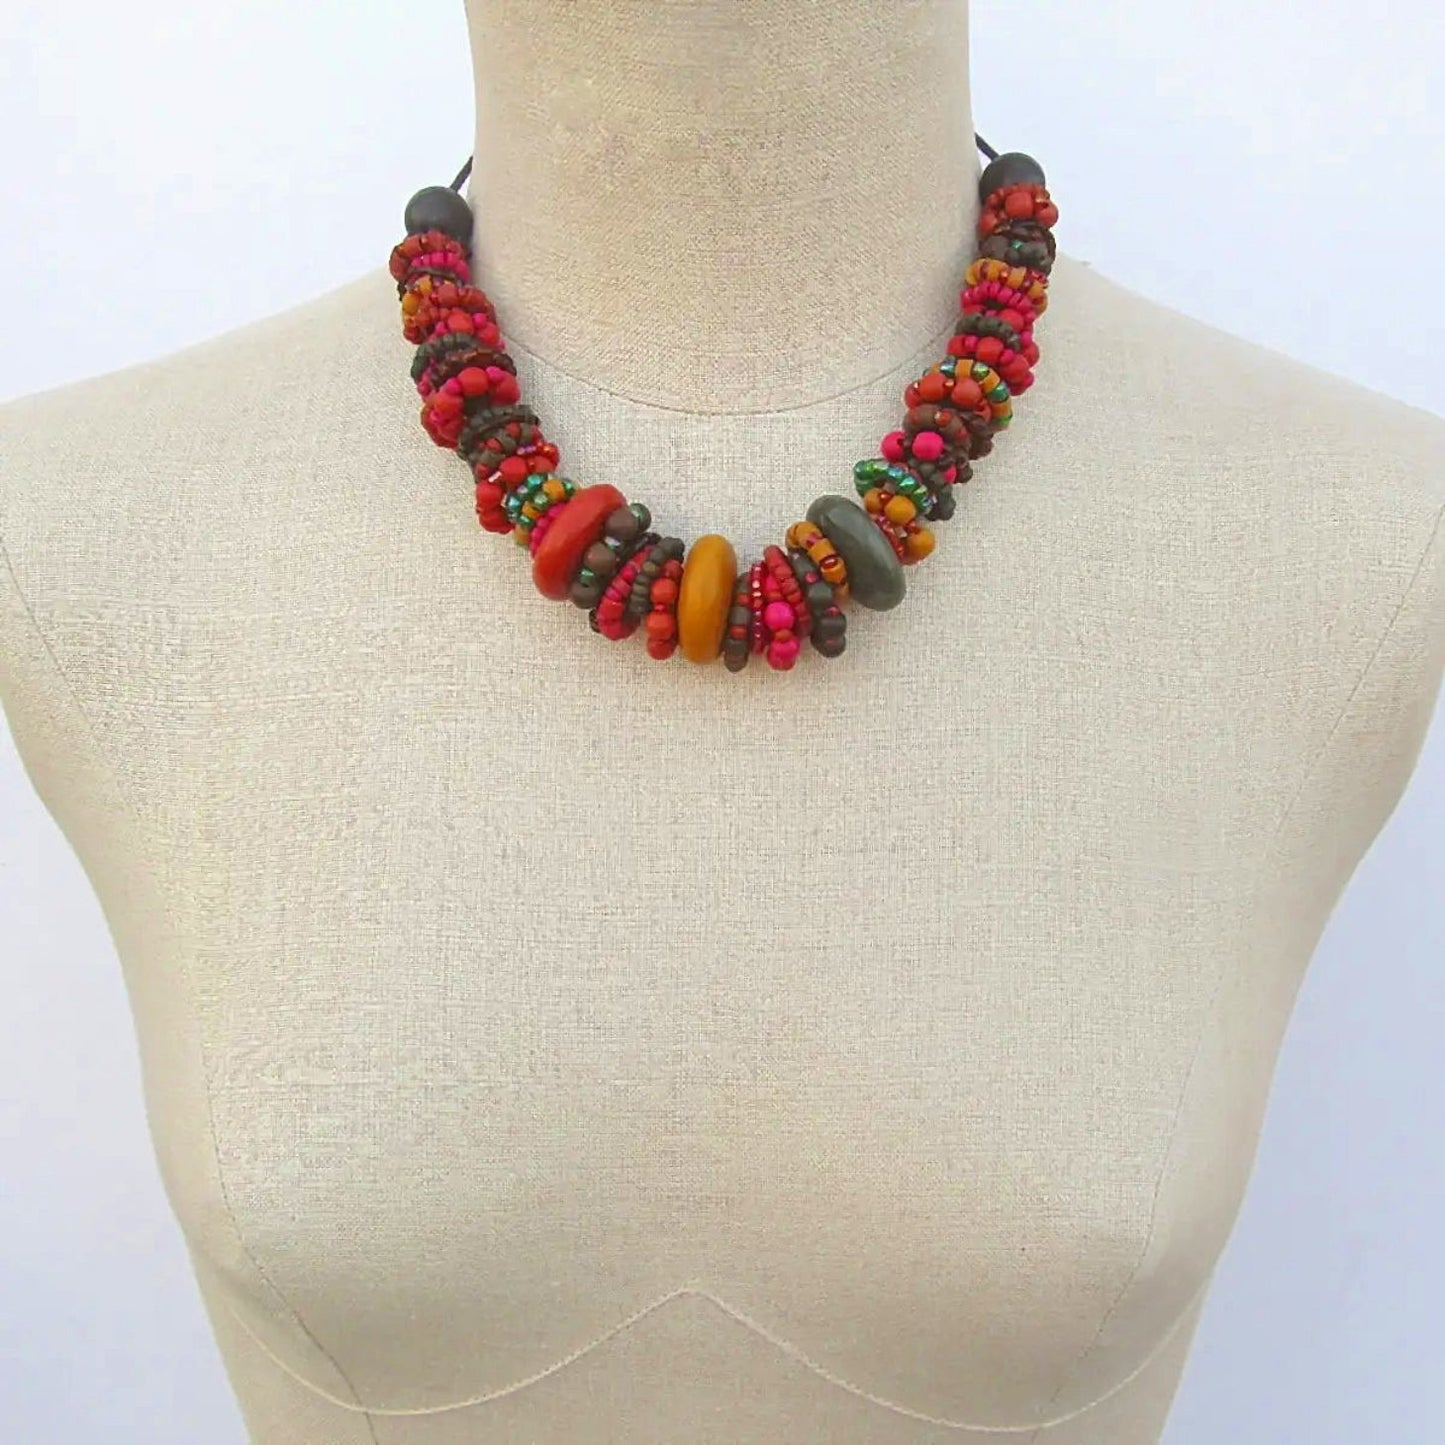 Handmade Necklace Comes In 2 Colors